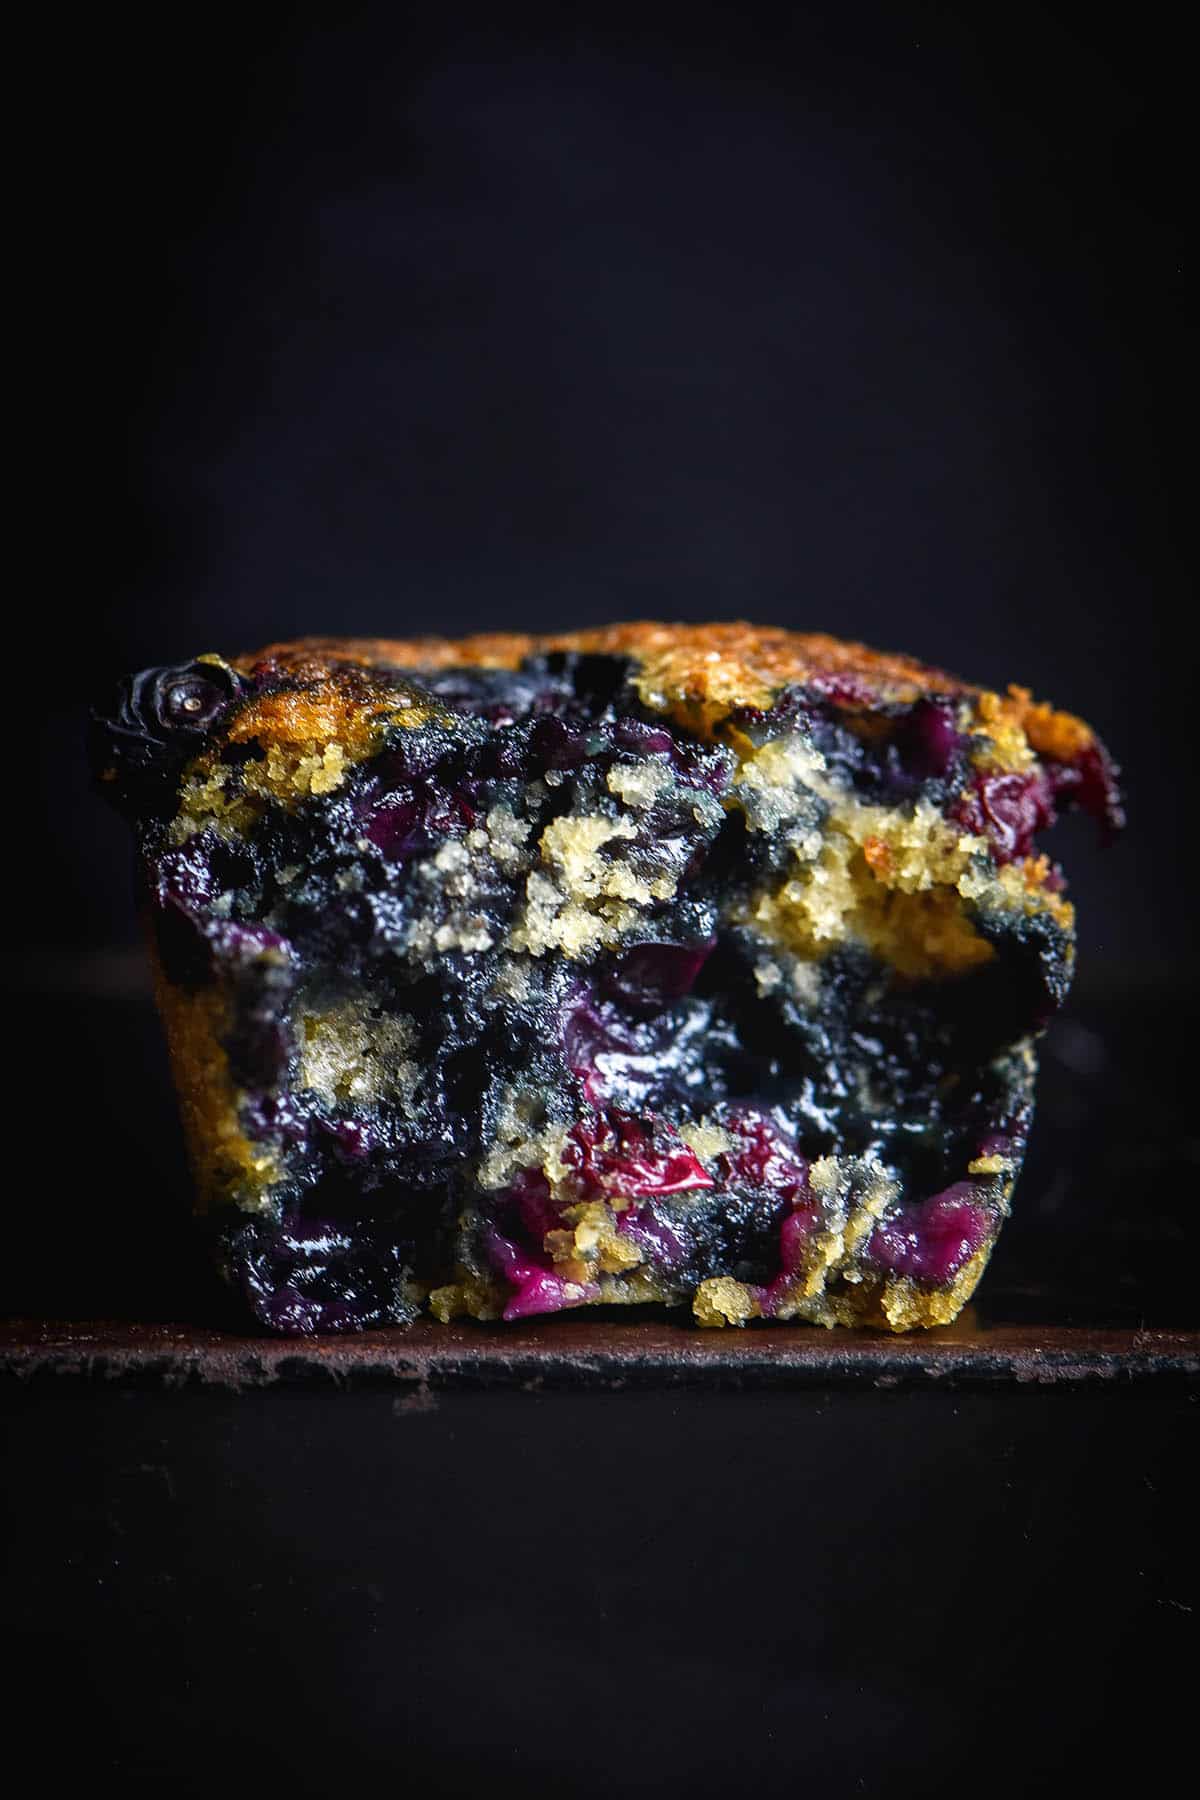 A moody macro image of a gluten free vegan blueberry muffin on a black rustic table against a black background. The muffin has been torn in half, revealing the deeply blueberry coloured crumb inside. 